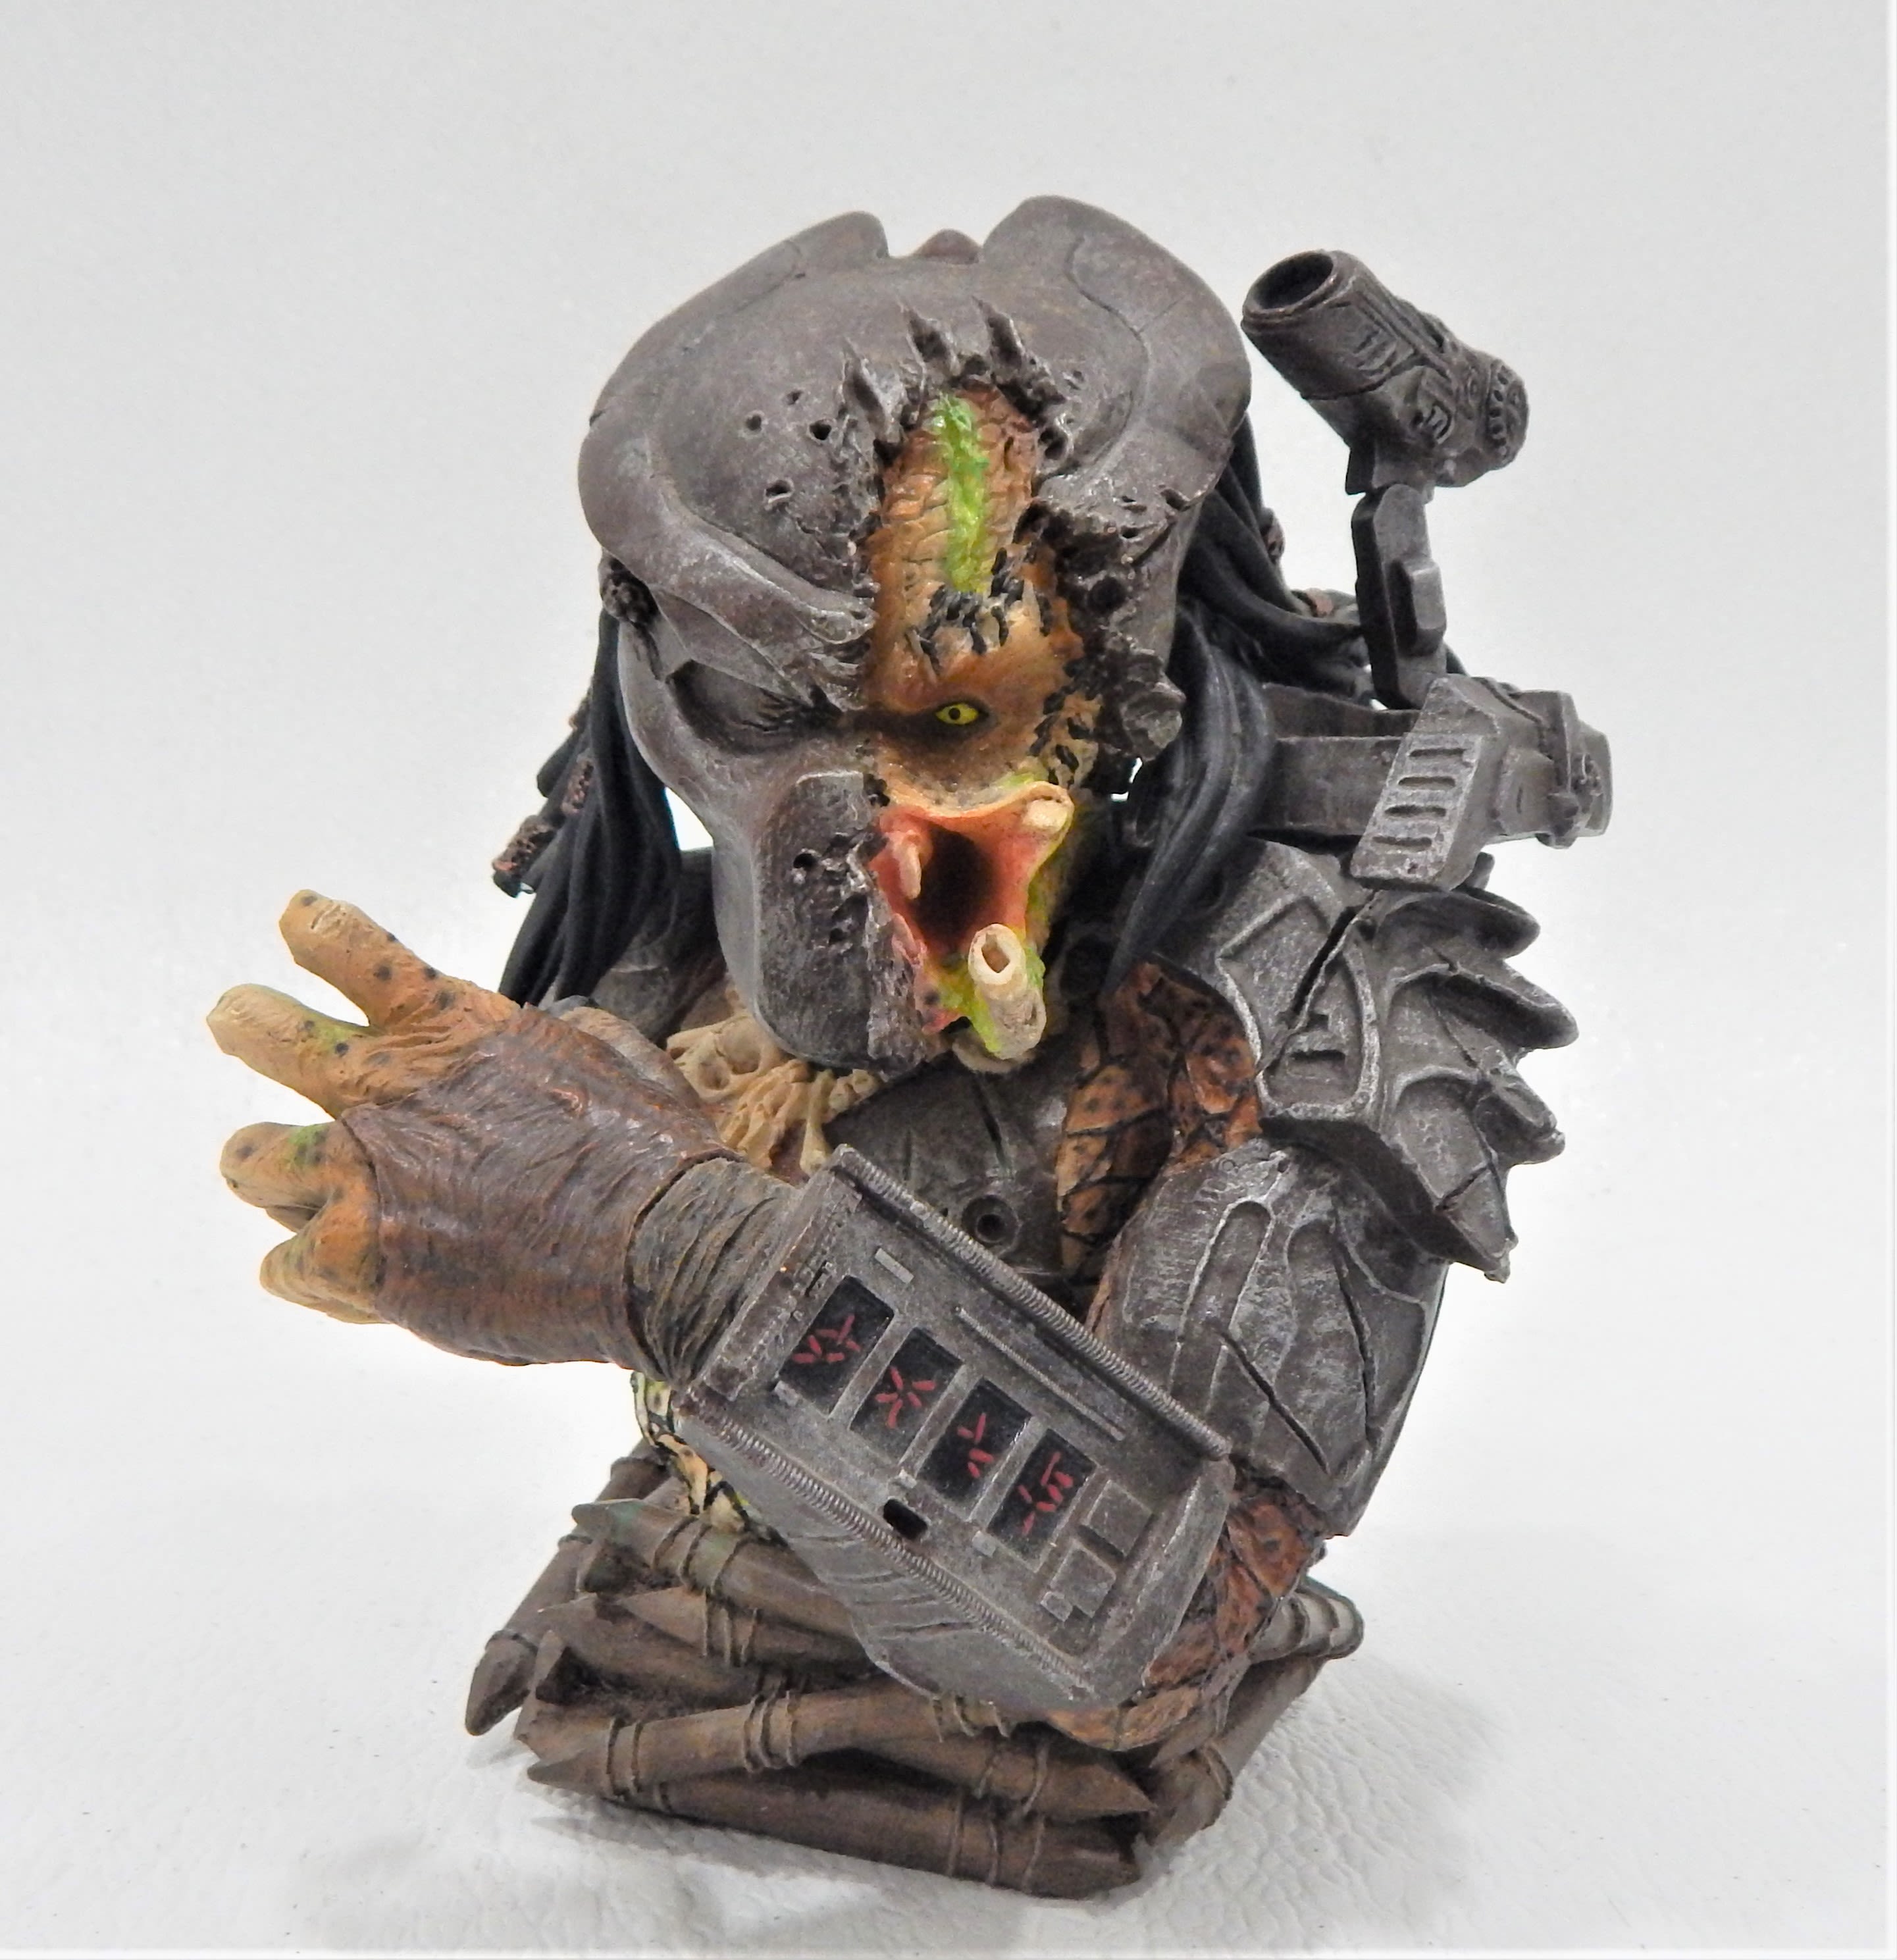 Buy Predator Defeated Mini Bust Statue Ltd Ed Alien Palisades Toys for USD  49.99 | GoodwillFinds